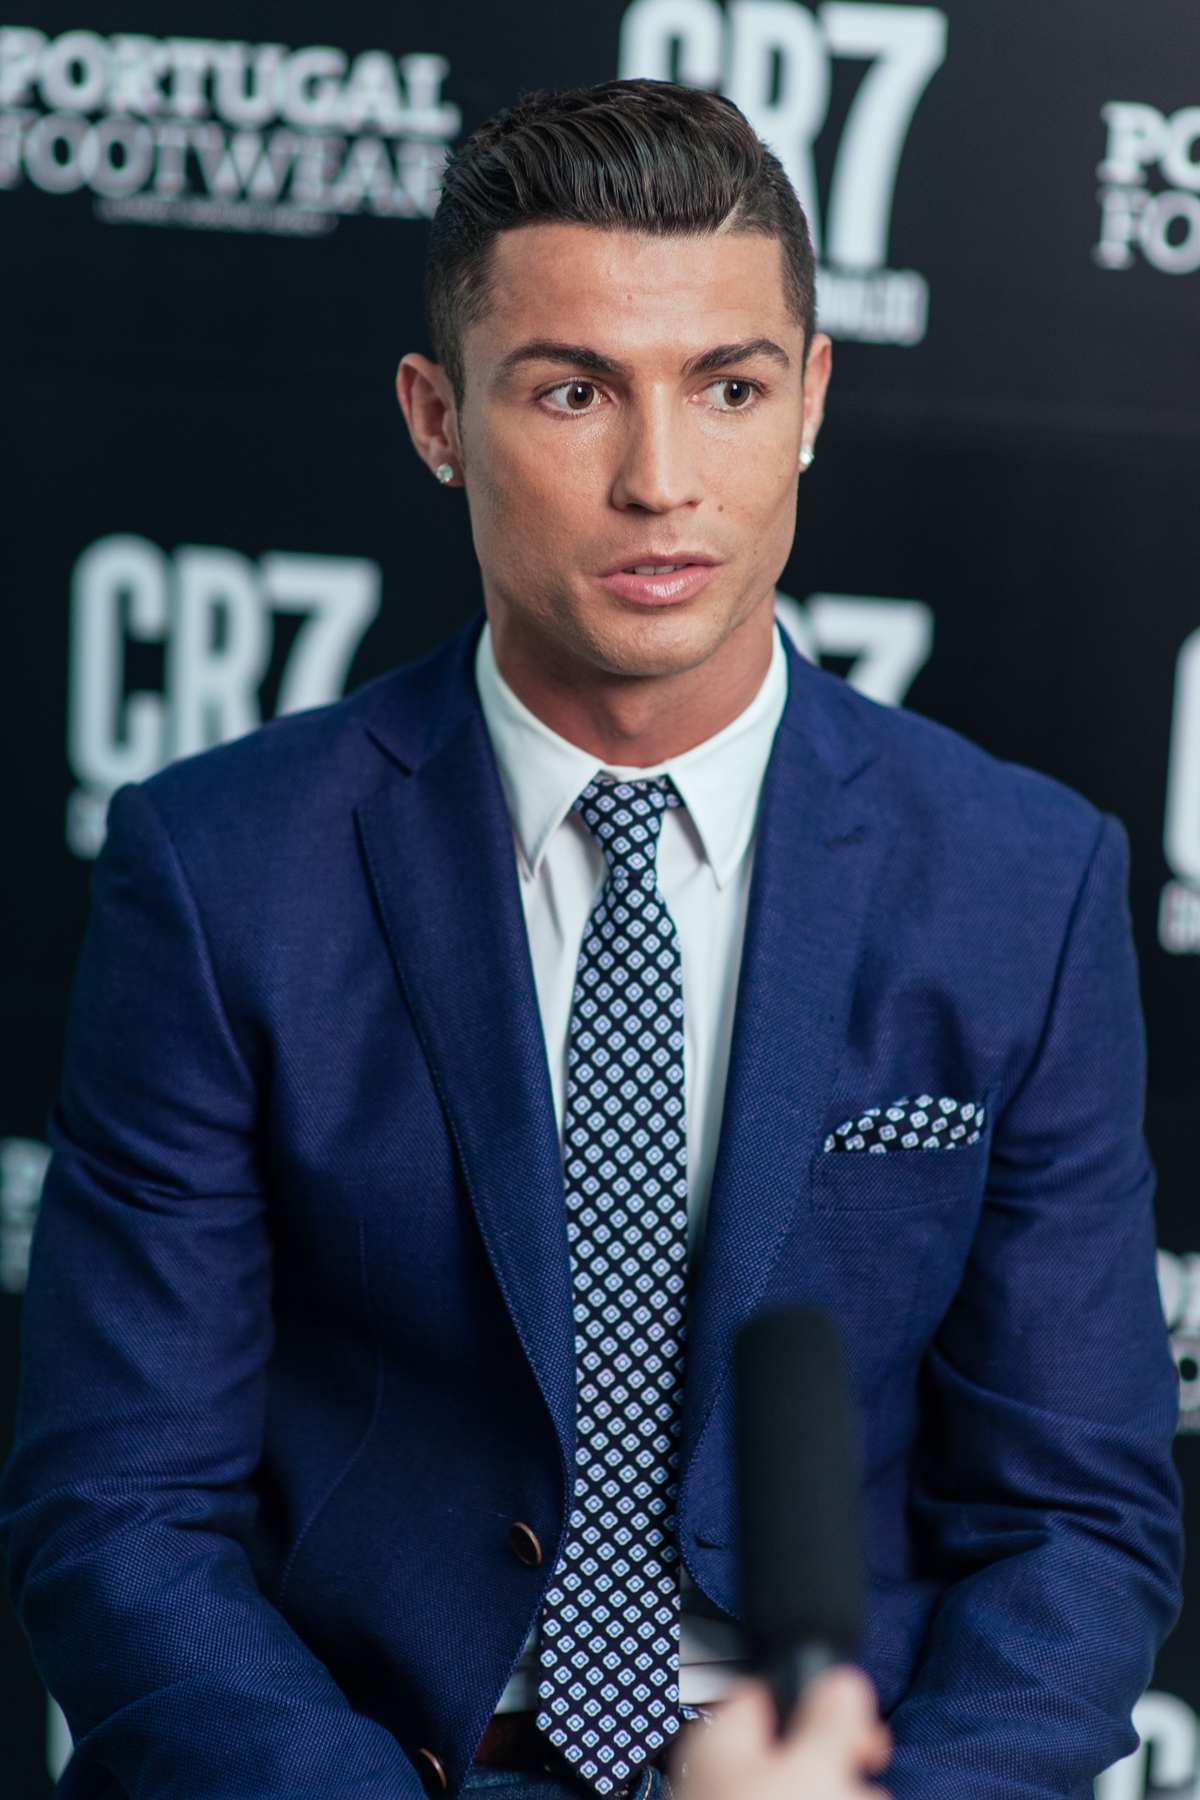 Cristiano Ronaldo at FW CR Footwear Collection Launch